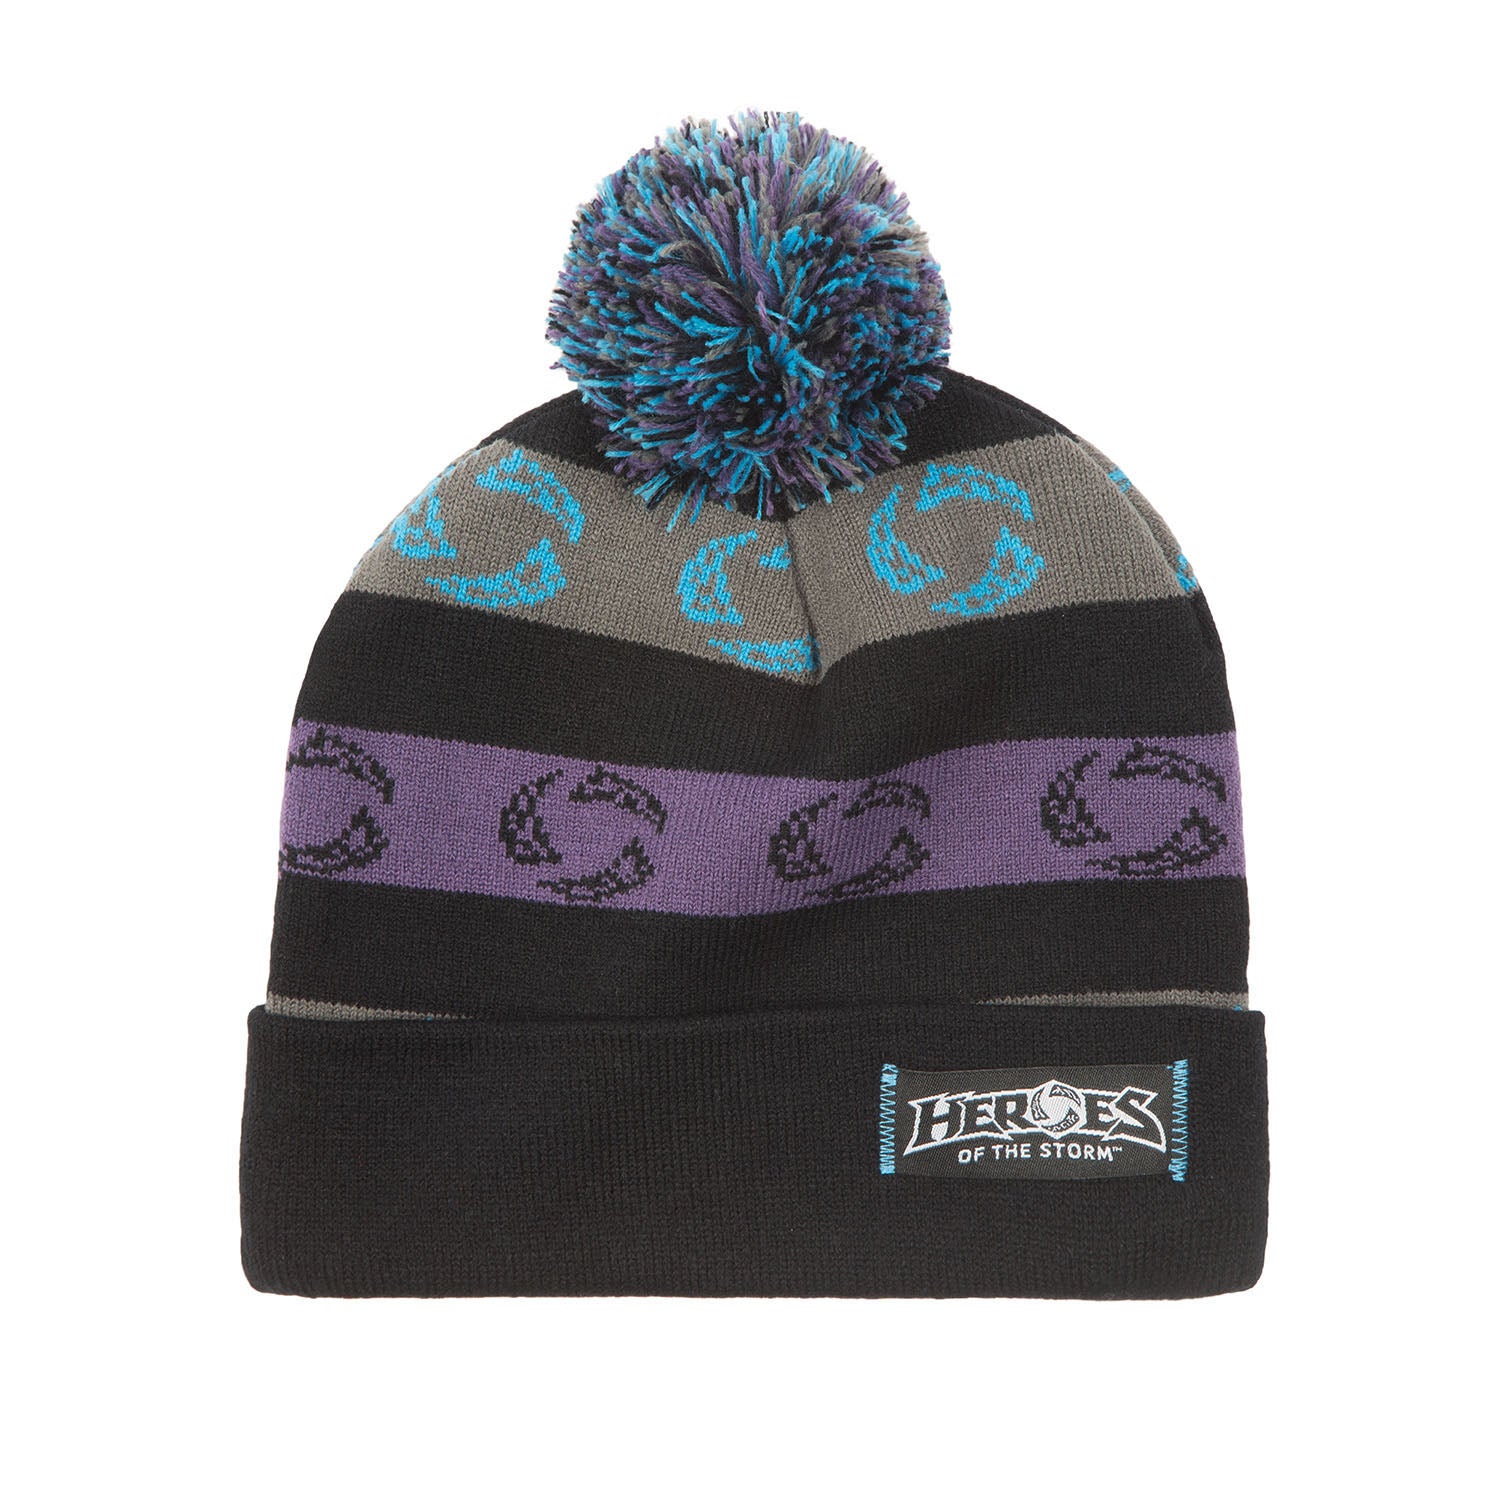 Heroes of the Storm J!NX Winmore Pom Beanie in Black - Front View